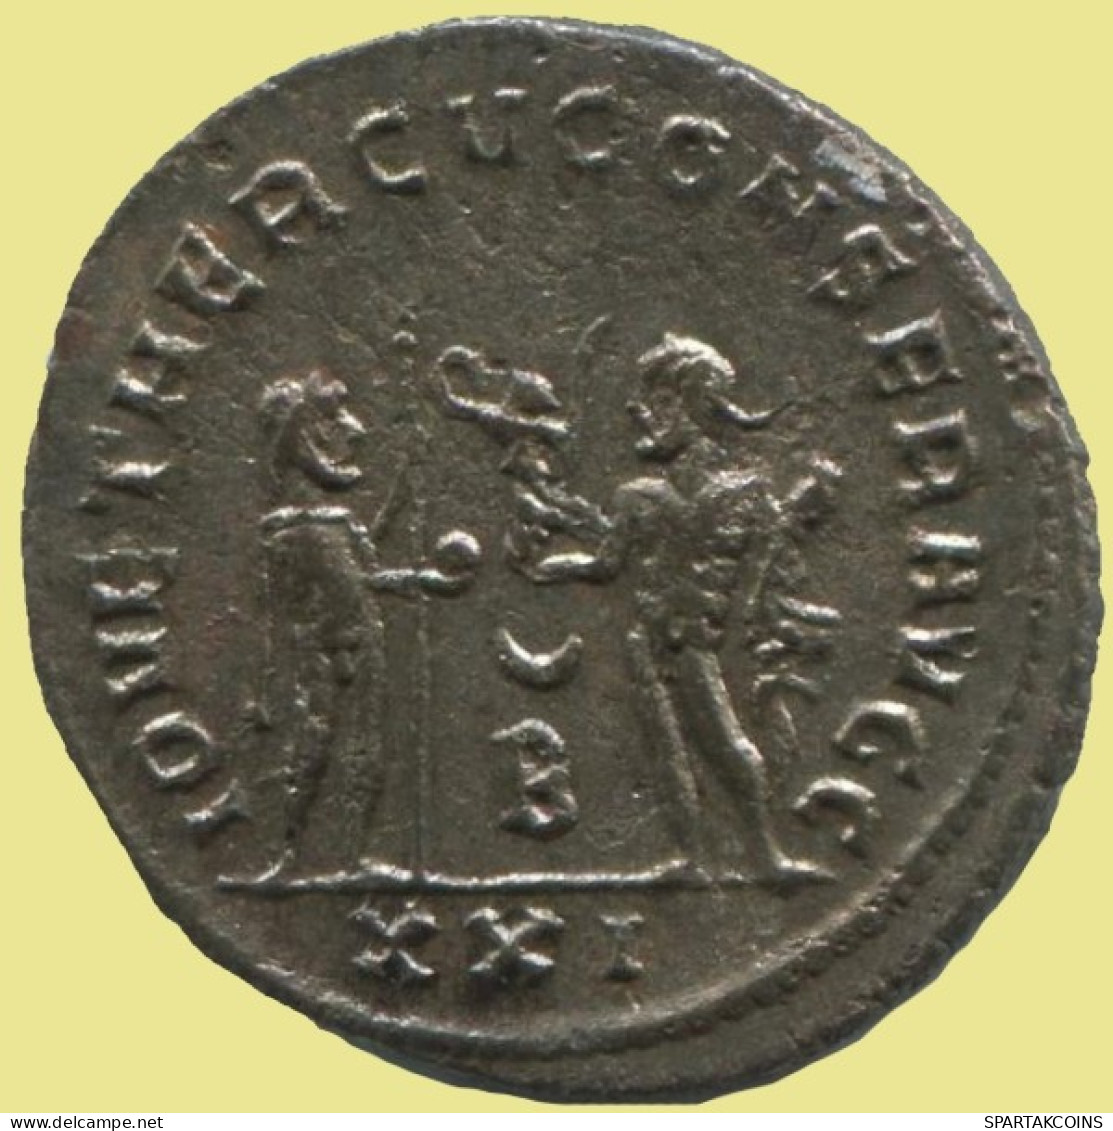 DIOCLETIAN ANTONINIANUS Antioch (? B/XXI) AD293 IOVETHERCVCONSER. #ANT1869.48.U.A - The Tetrarchy (284 AD To 307 AD)